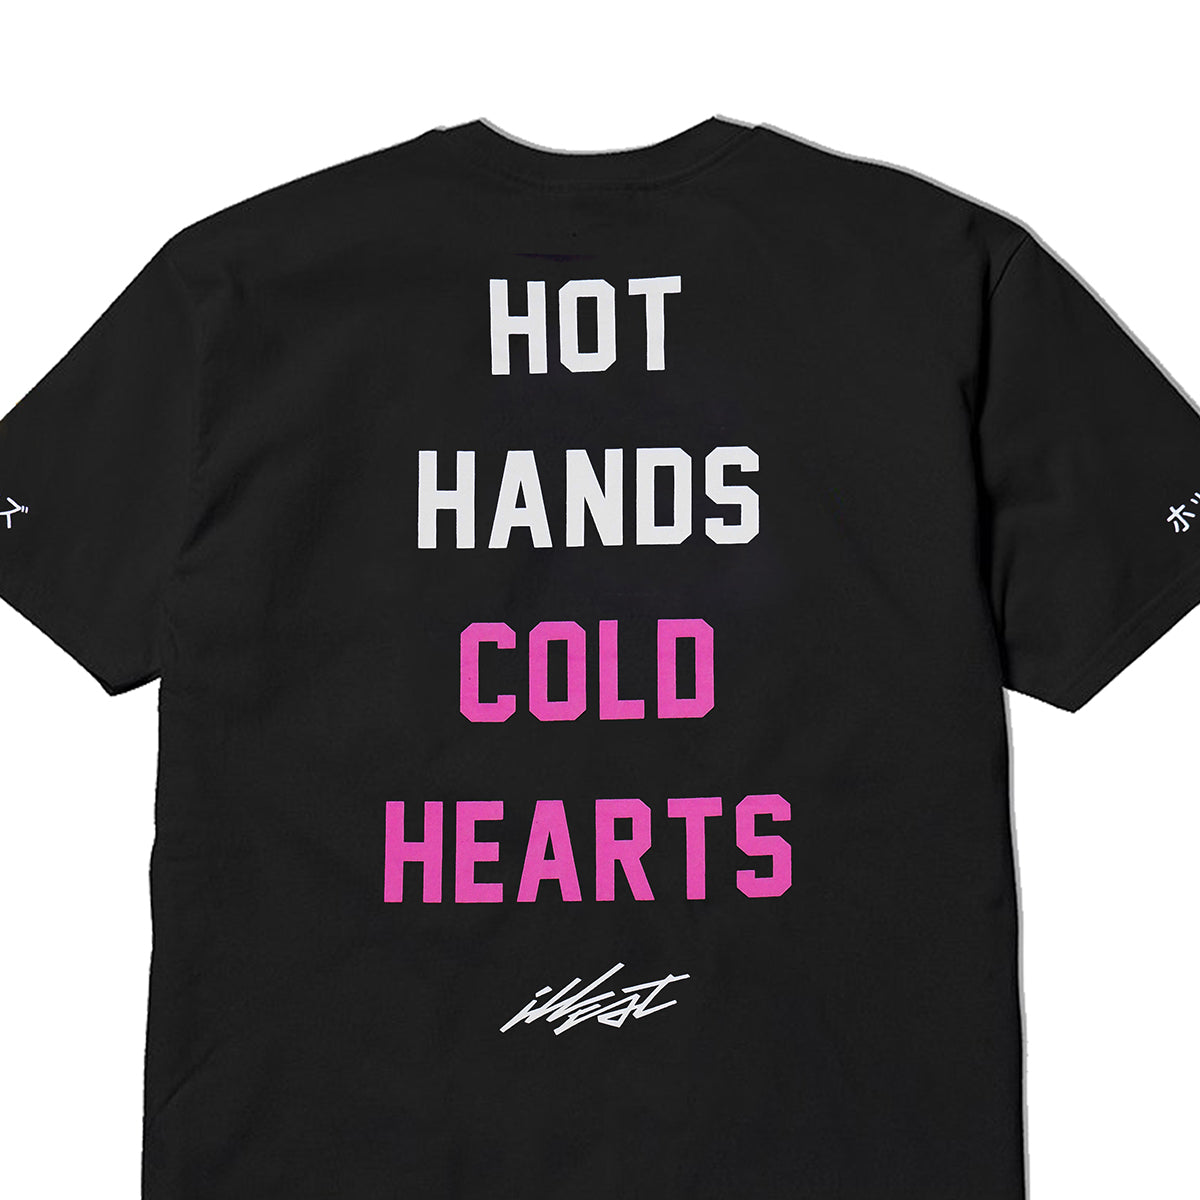 HOT HANDS COLD HEARTS BLACK SHORT SLEEVES TEE